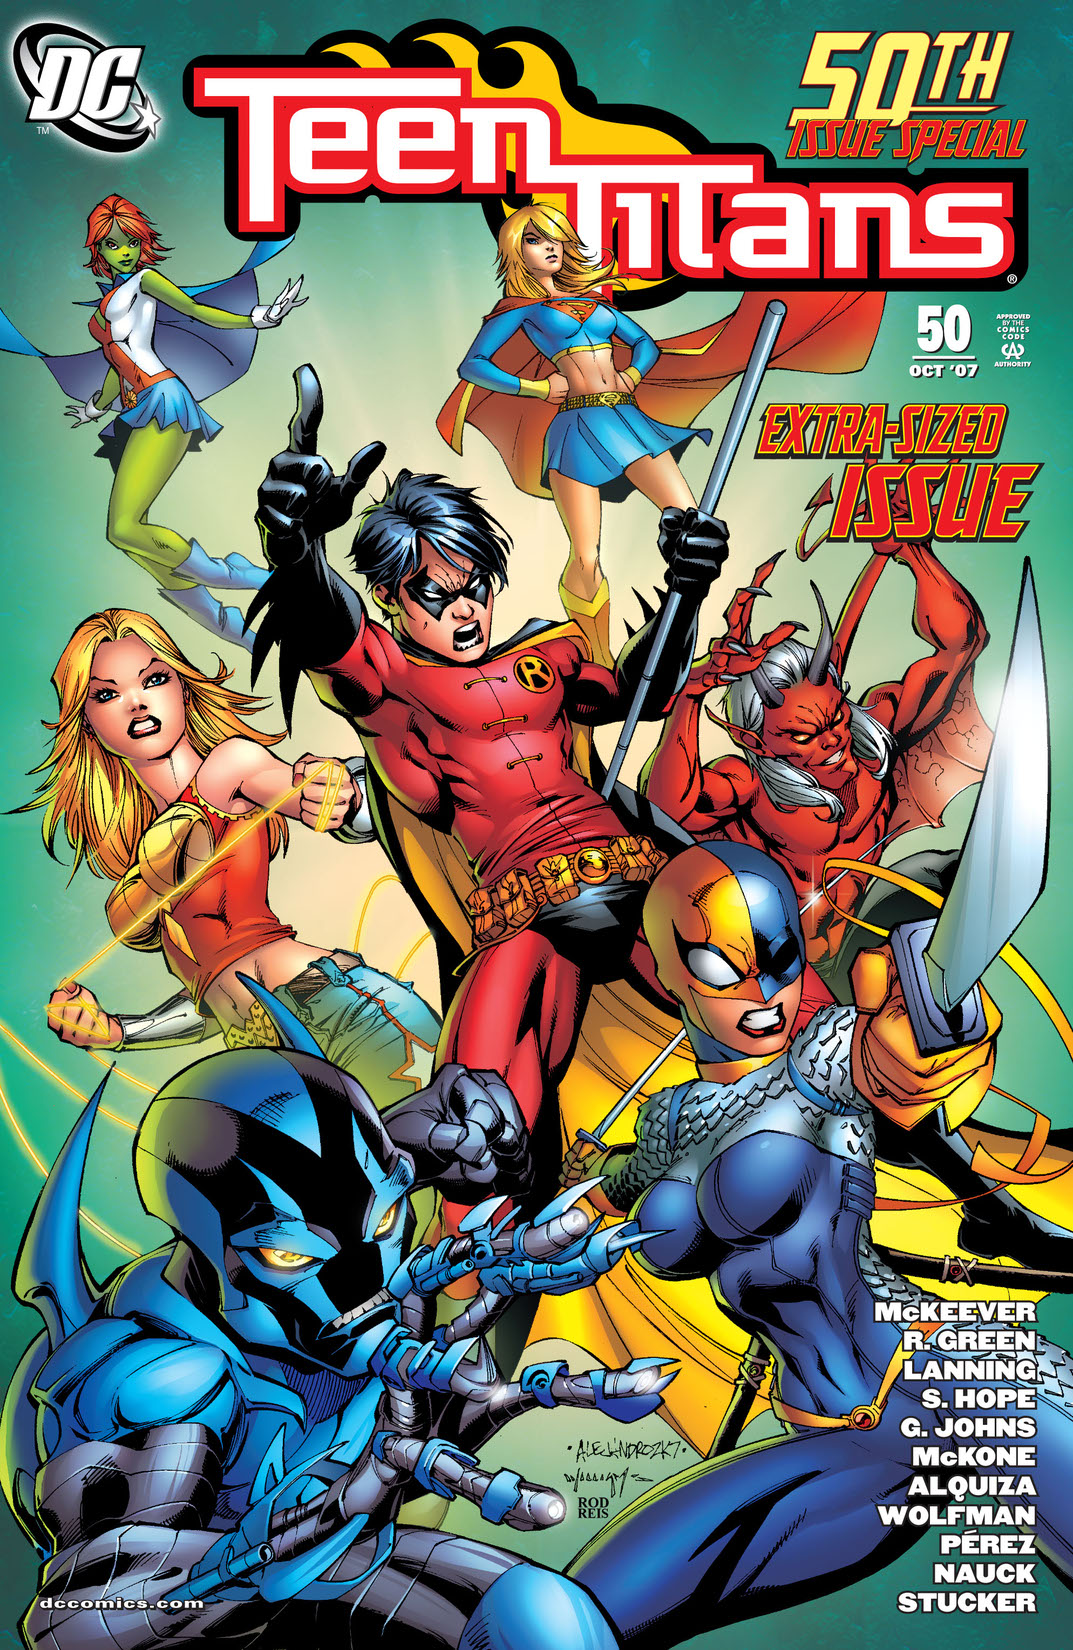 Teen Titans (2003-) #50 preview images